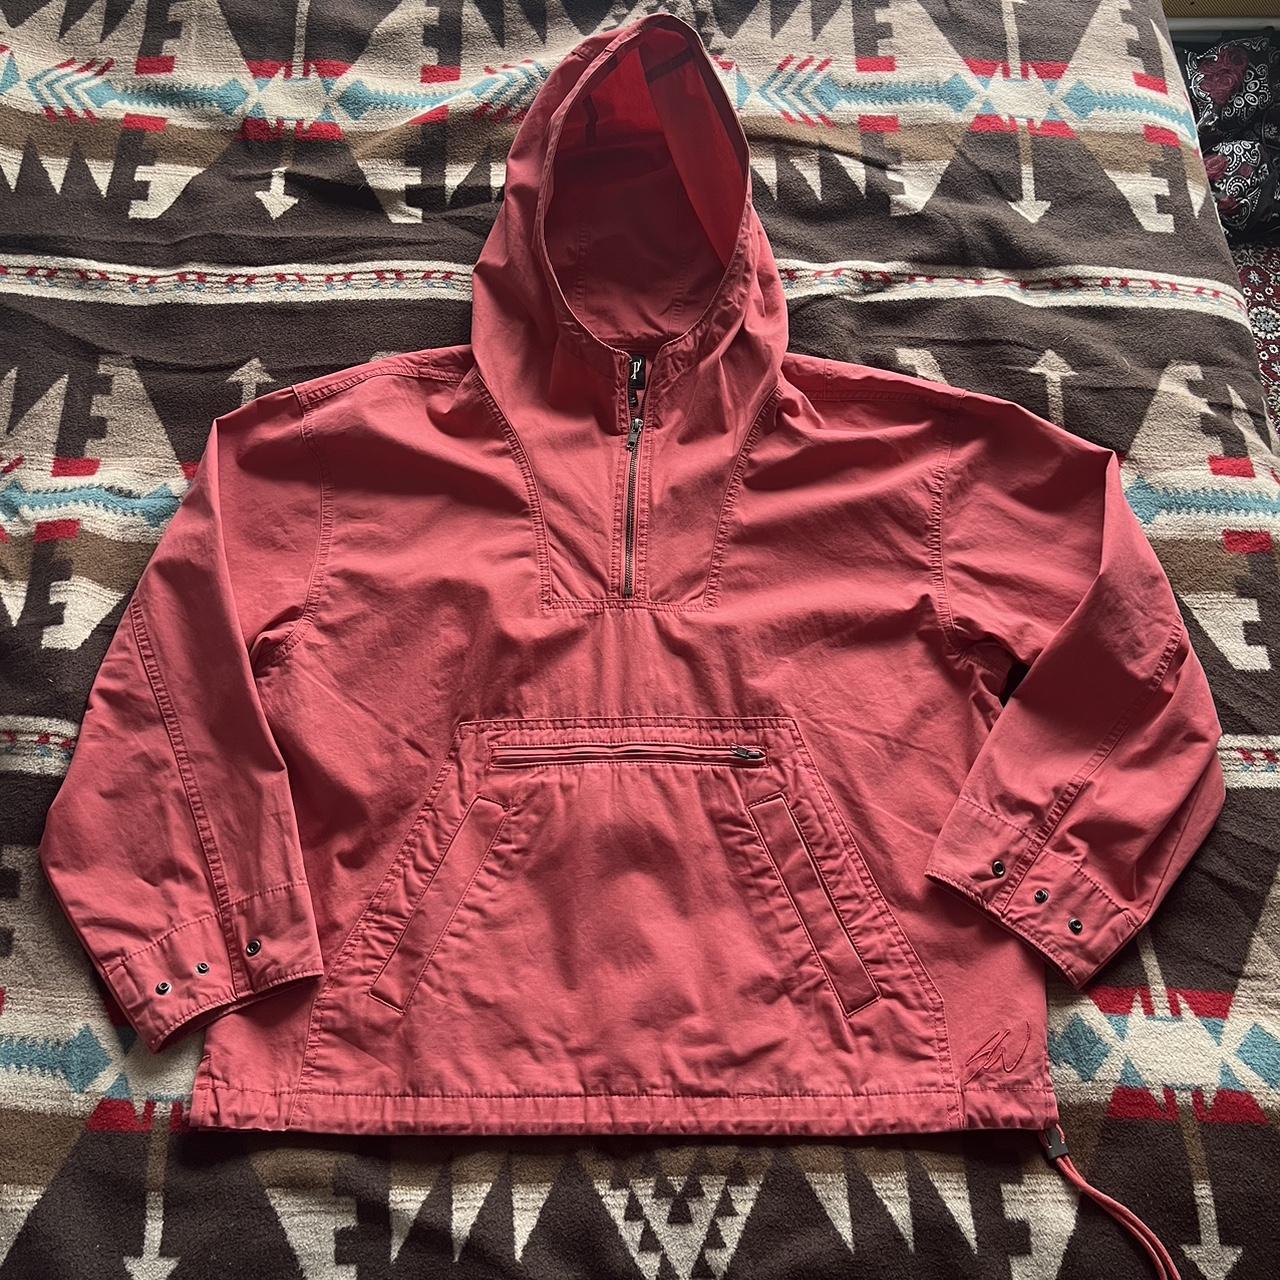 Gap x Sean wotherspoon red anorak size small (fits... - Depop